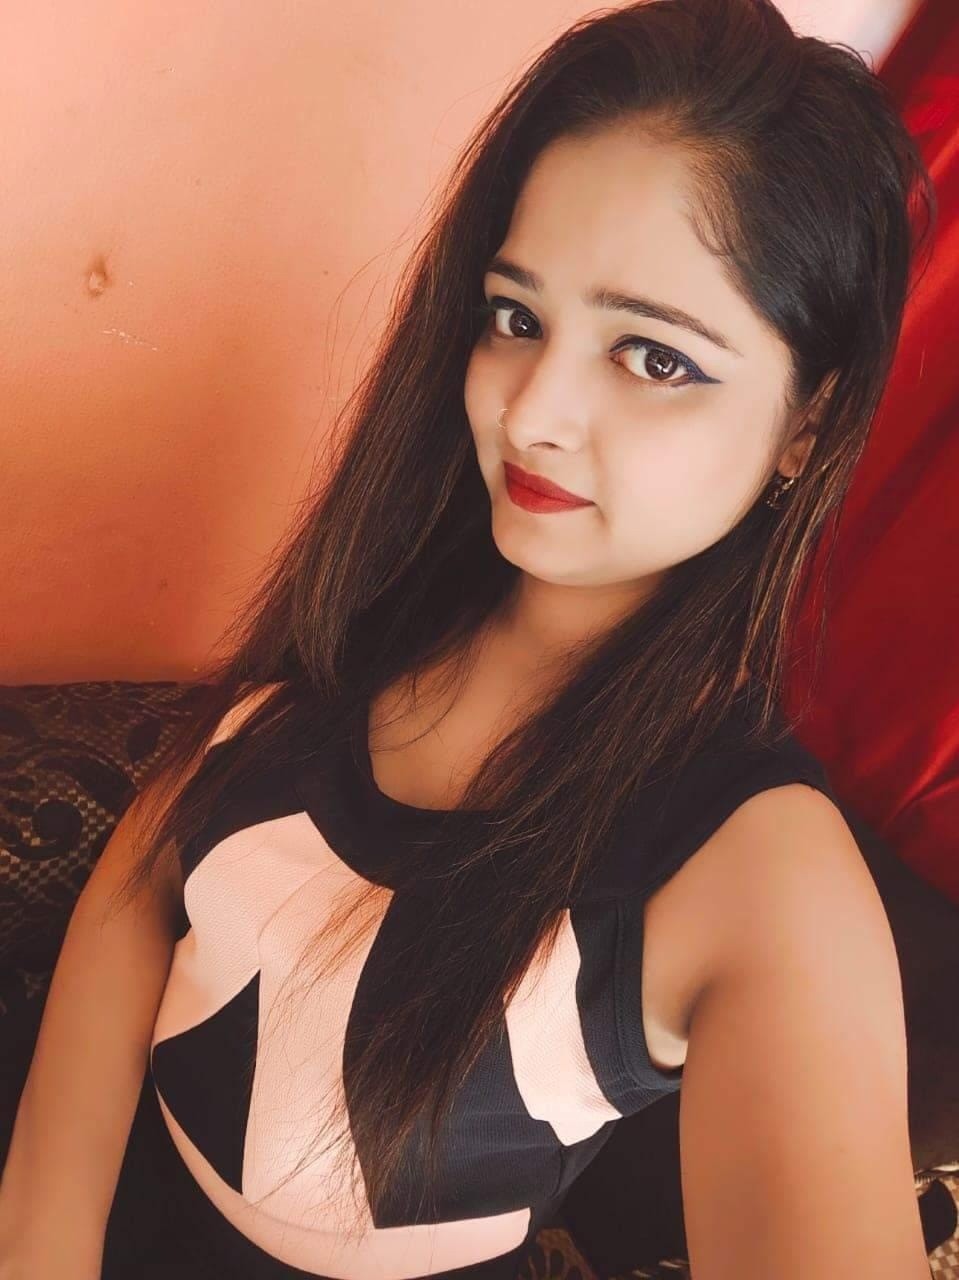 Call girl in Chandigarh Sector 16 